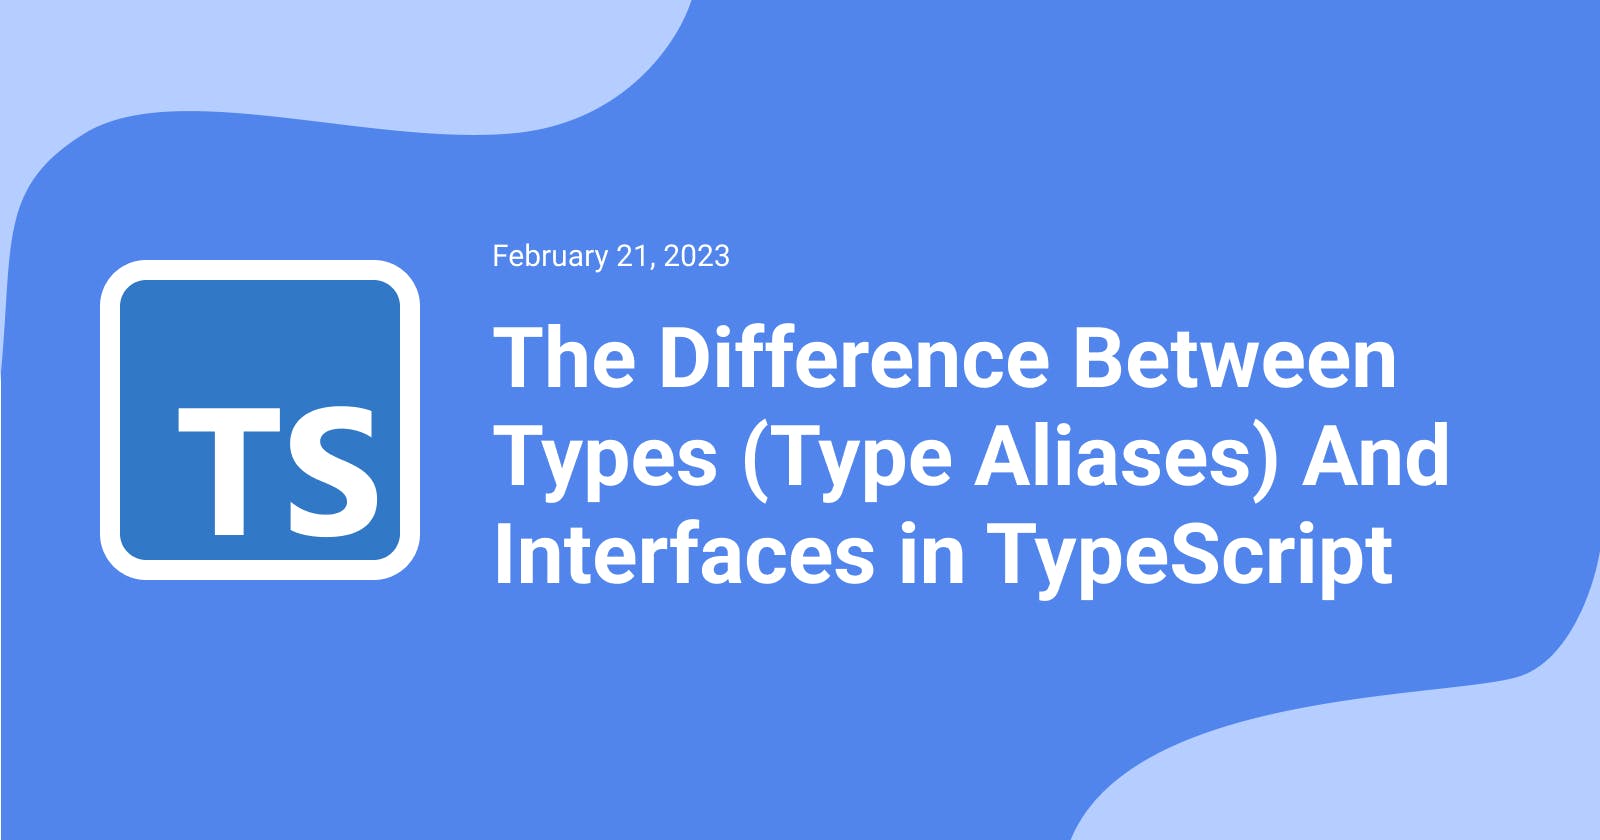 The Difference Between Types (Type Aliases) And Interfaces in TypeScript